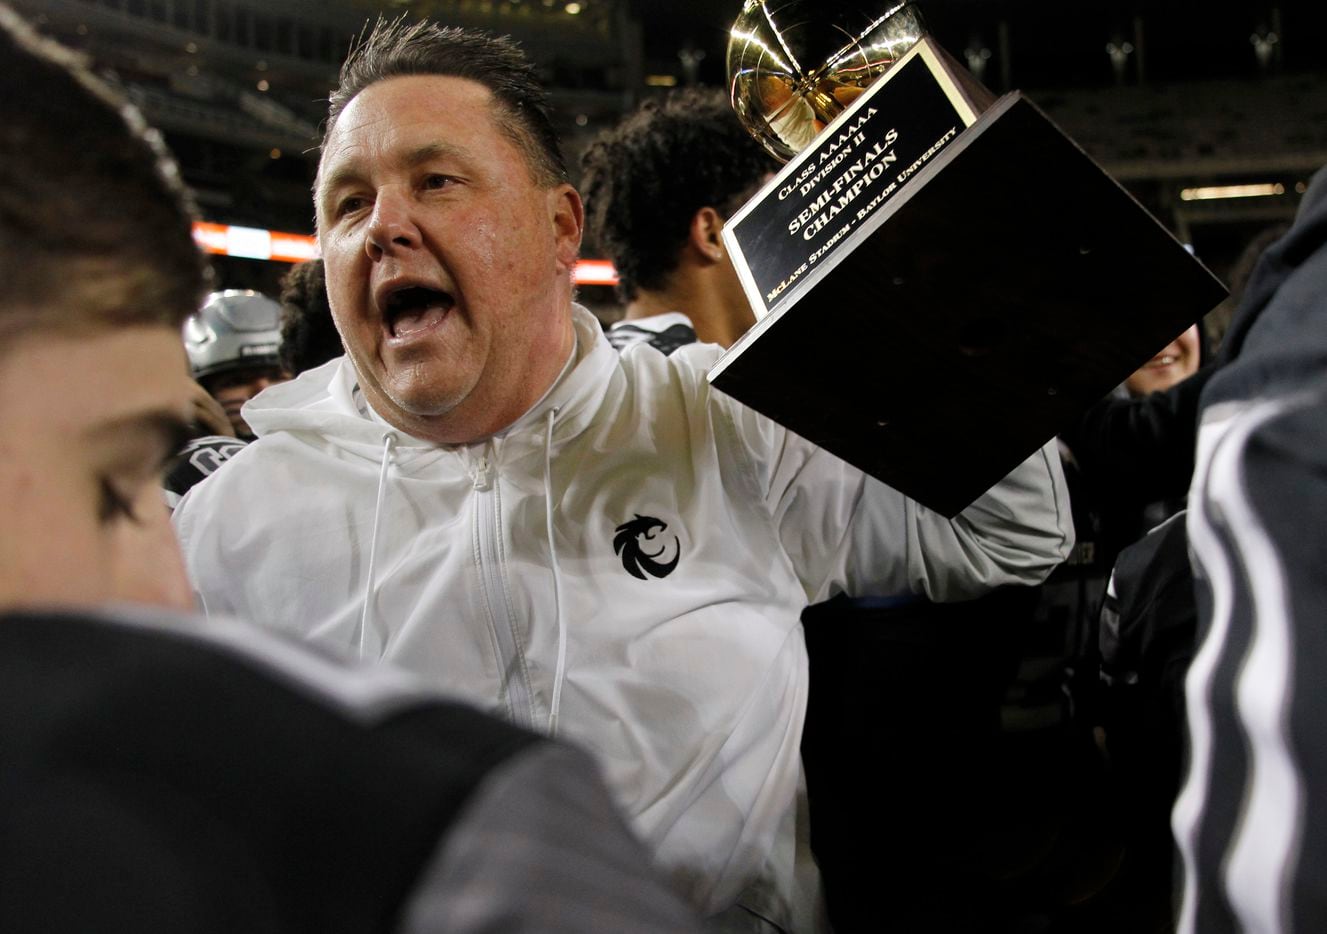 Denton Guyer head coach Rodney Webb hoists the Class 6A Division ll semifinal champion trophy following the Wildcat's 59-14 victory over Tomball to advance to the state final. The two teams played their  Class 6a Division ll state semifinal football playoff game at Baylor's McLane Stadium in Waco on December 11, 2021. (Steve Hamm/ Special Contributor)